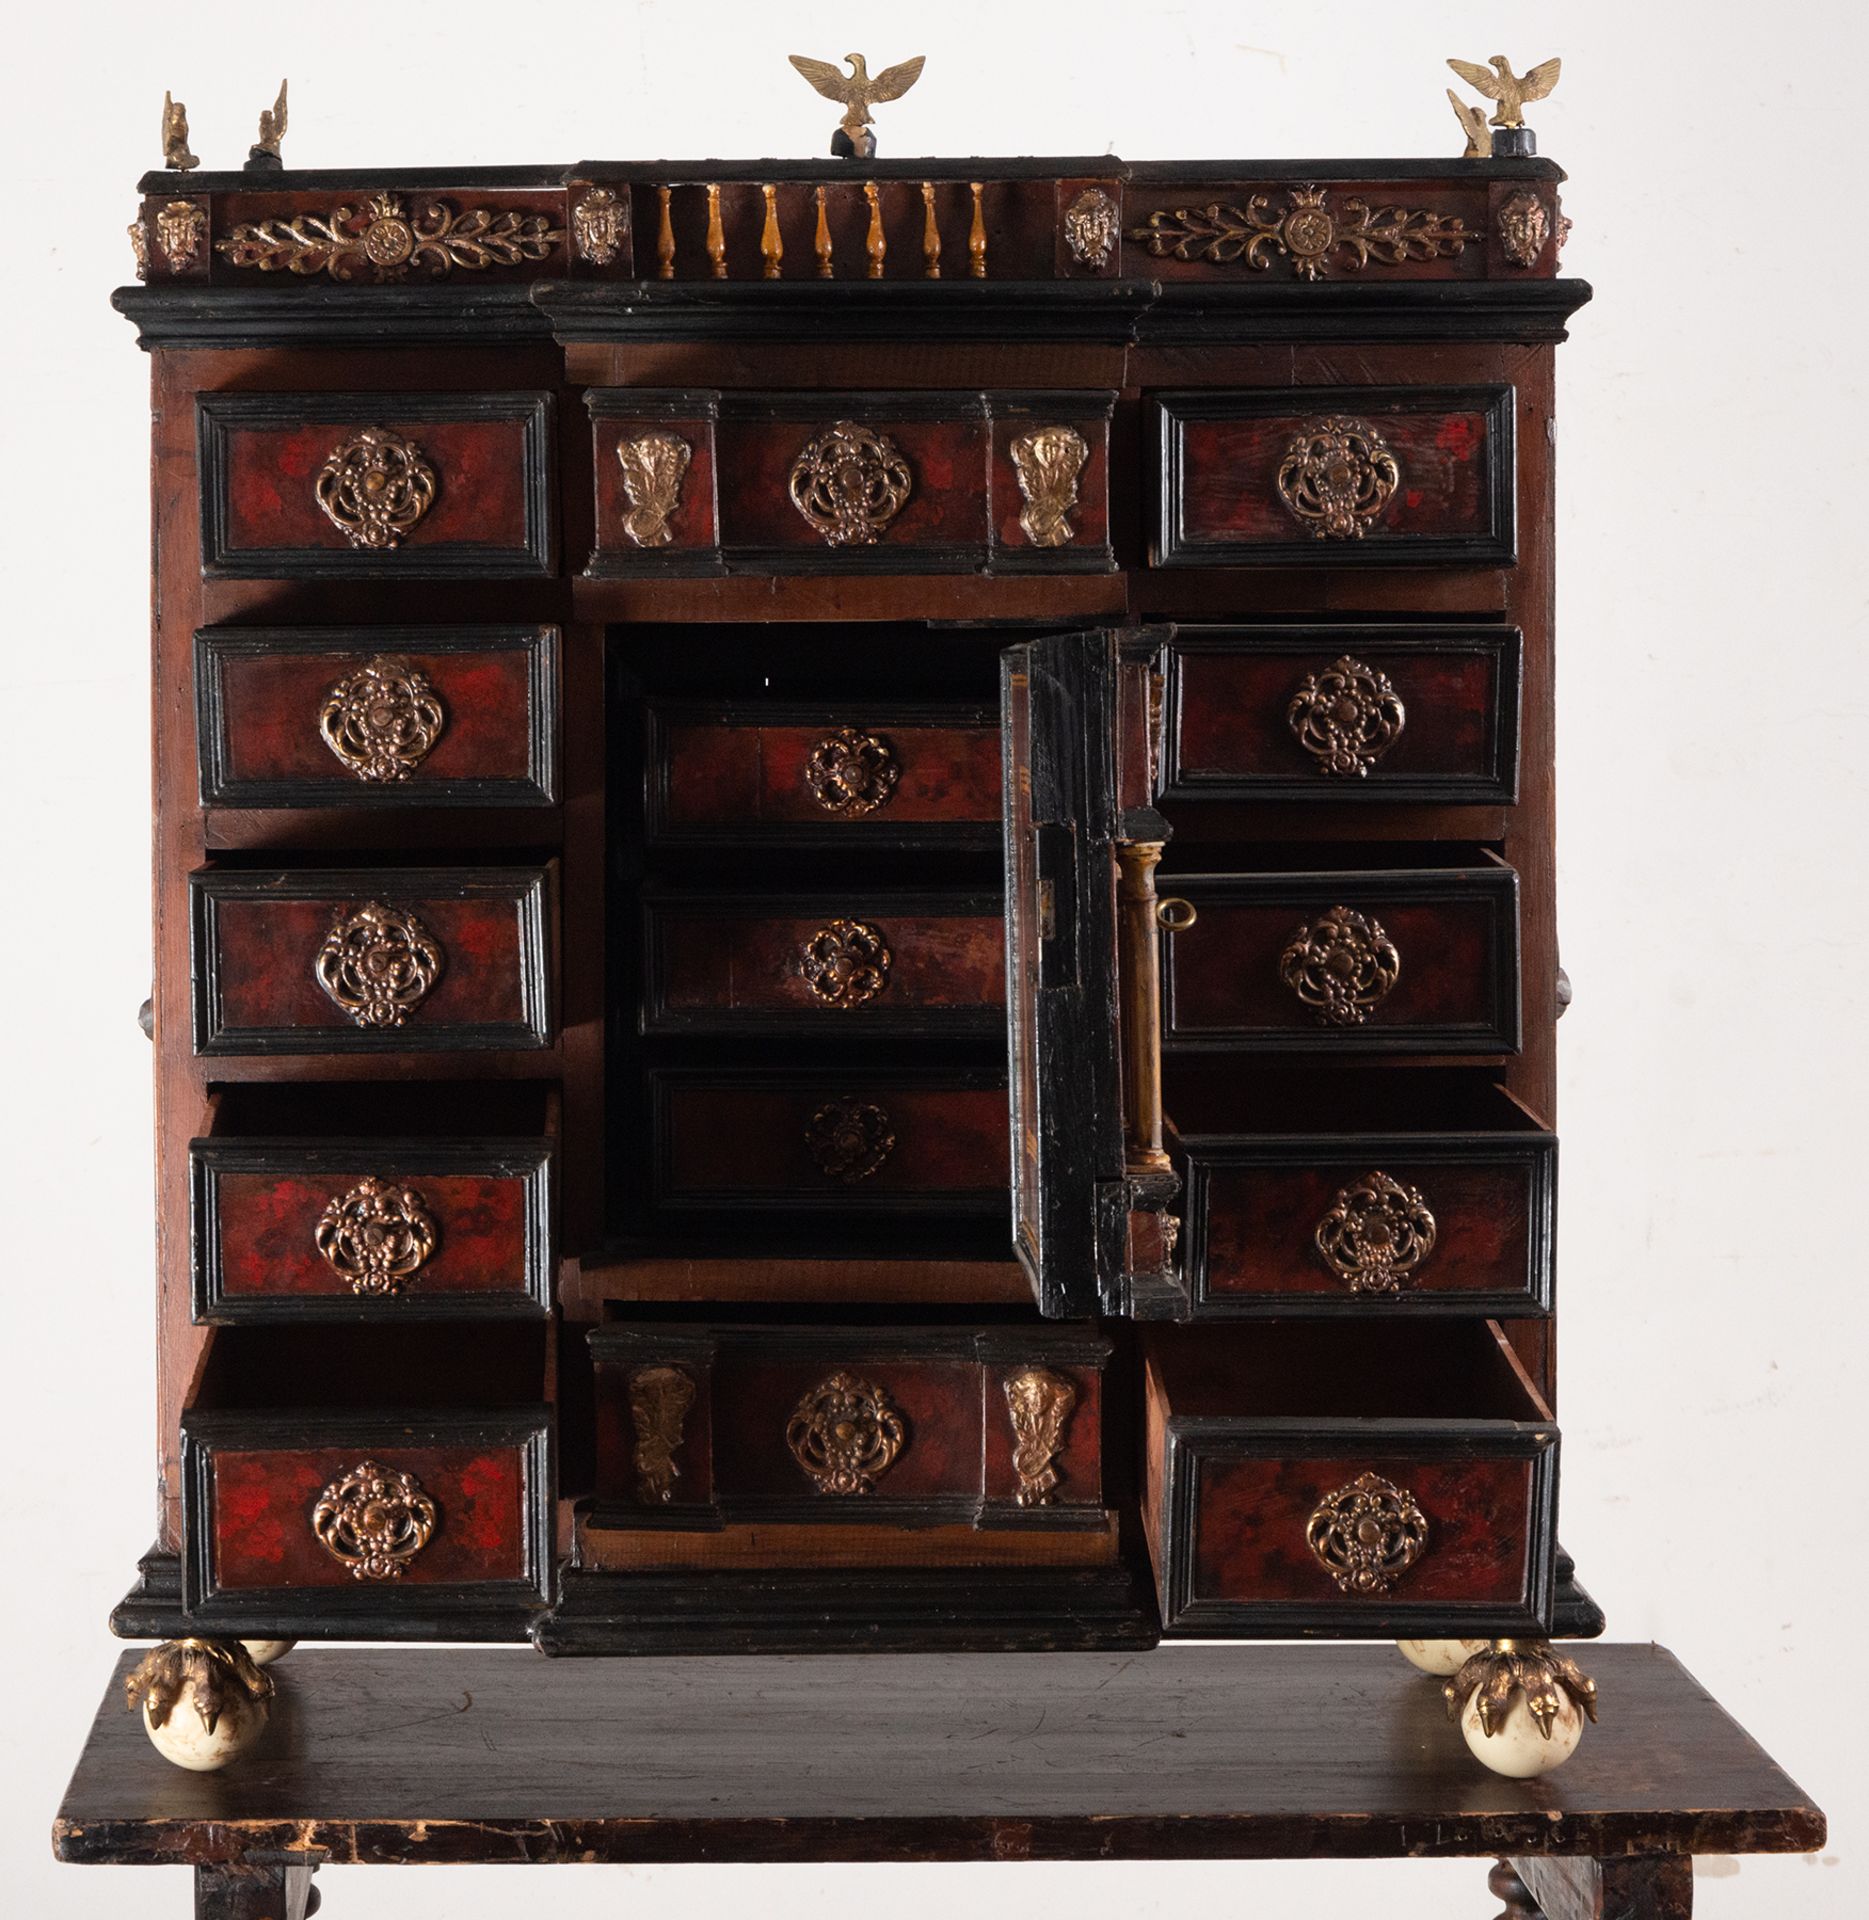 Hispano Flemish Cabinet in Tortoiseshell and bone, feet and sconces in bronze, 18th century - Image 2 of 8